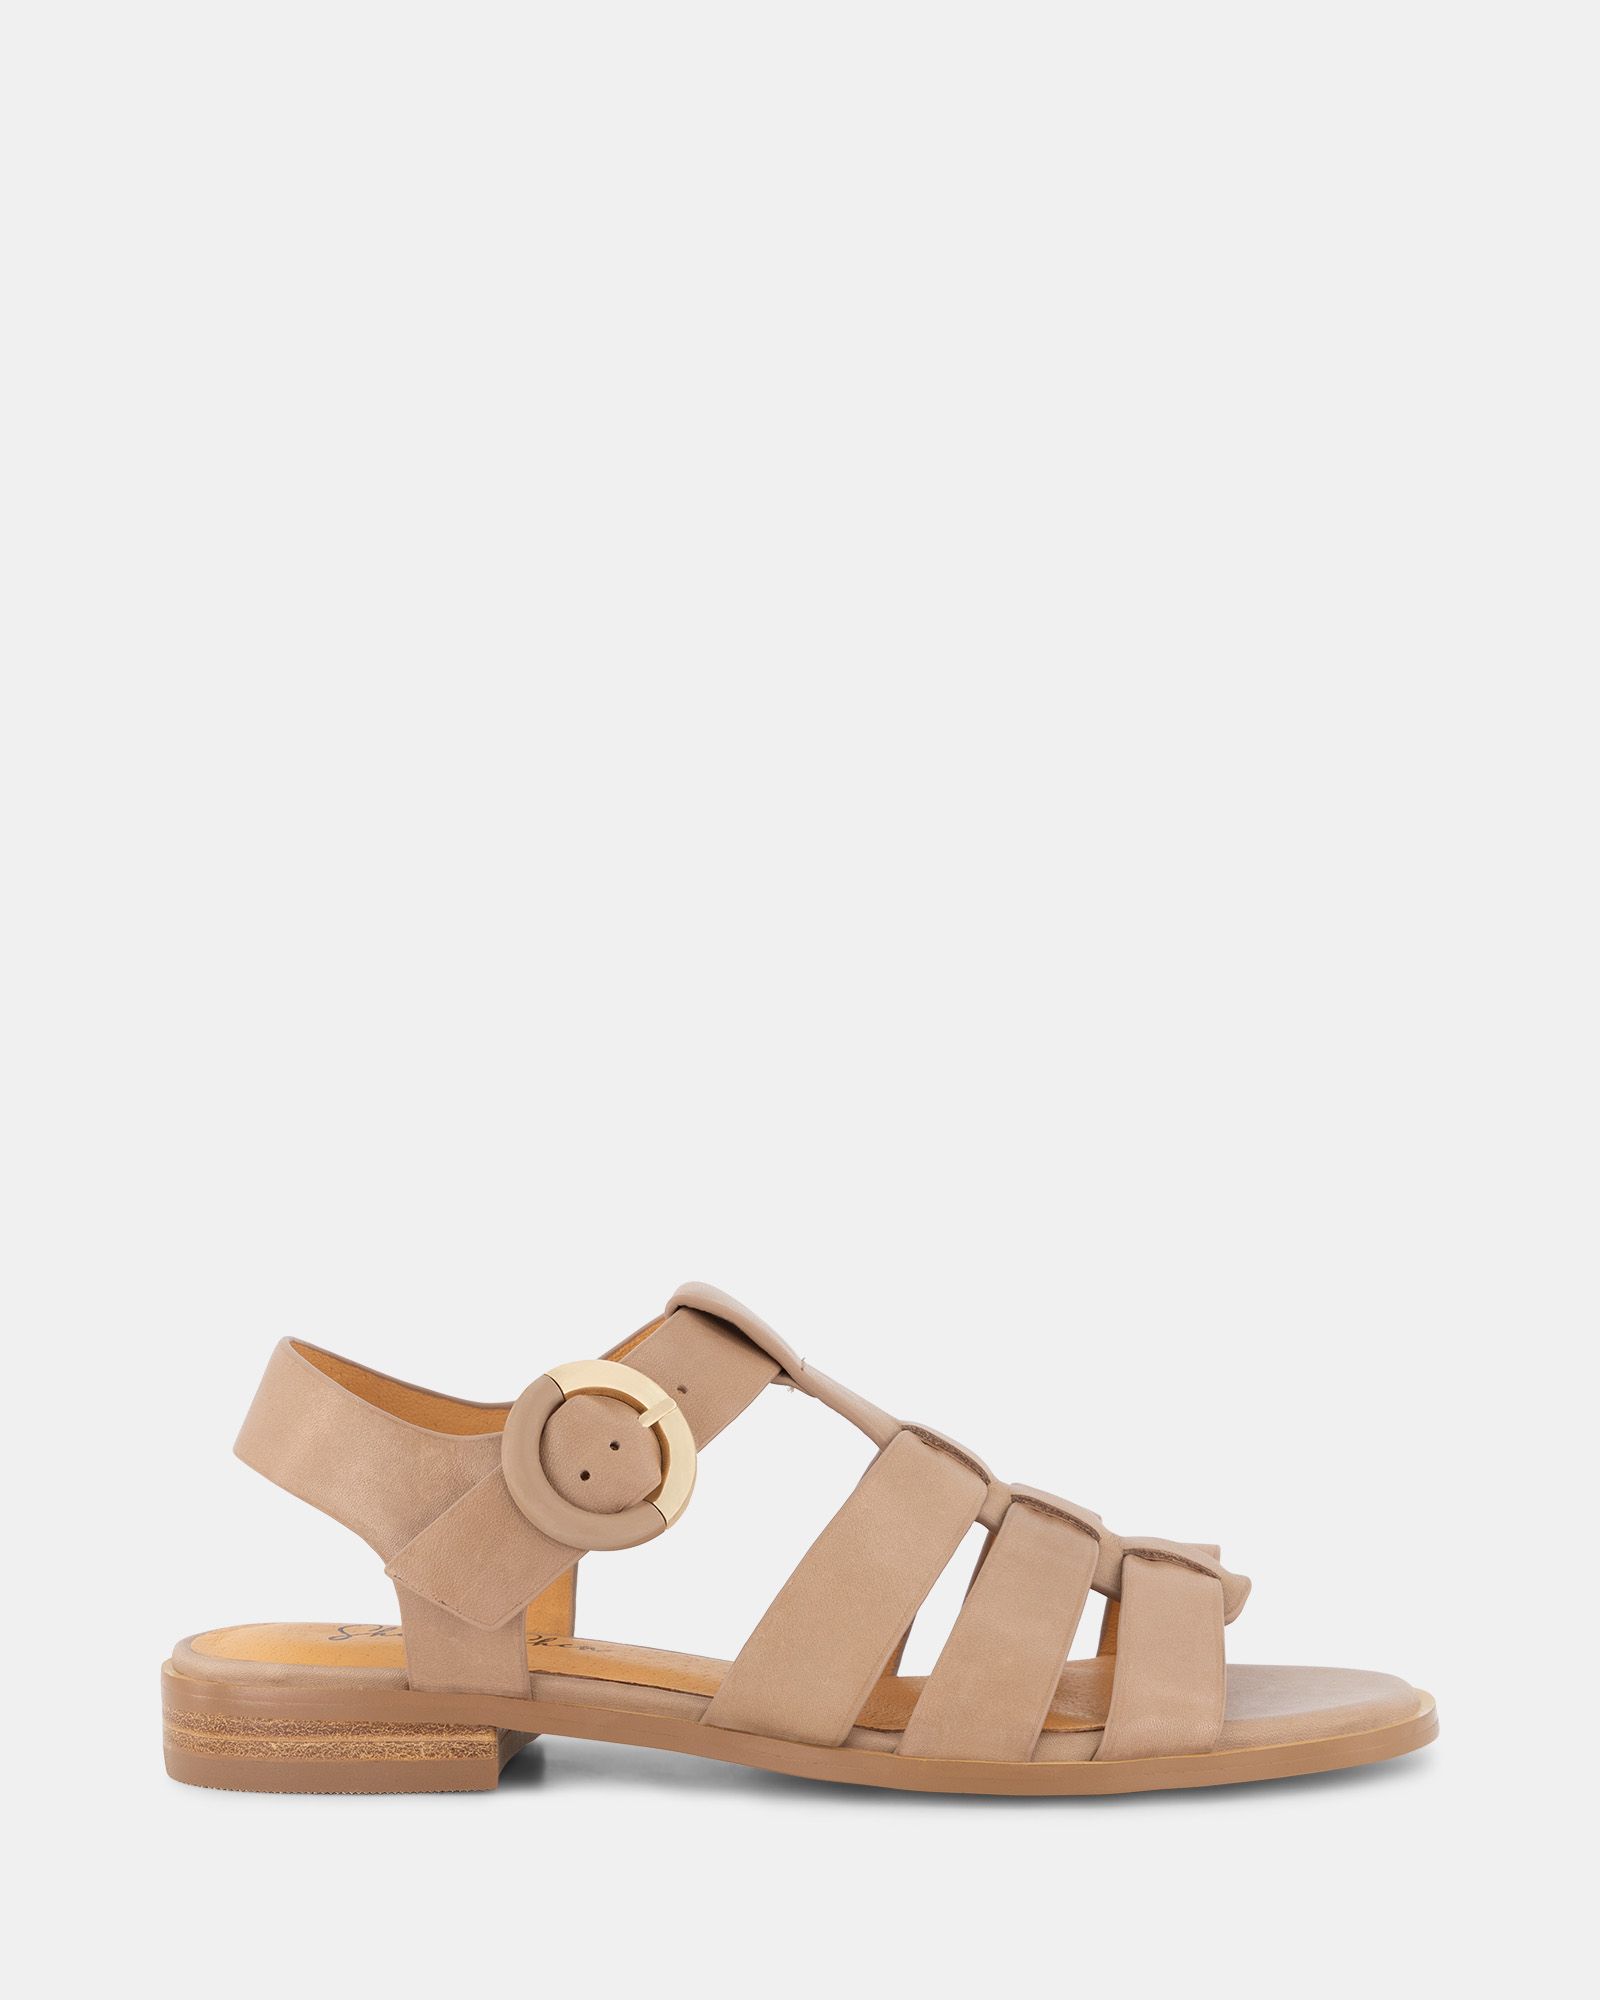 Buy MERINDA Taupe sandals Online at Shoe Connection